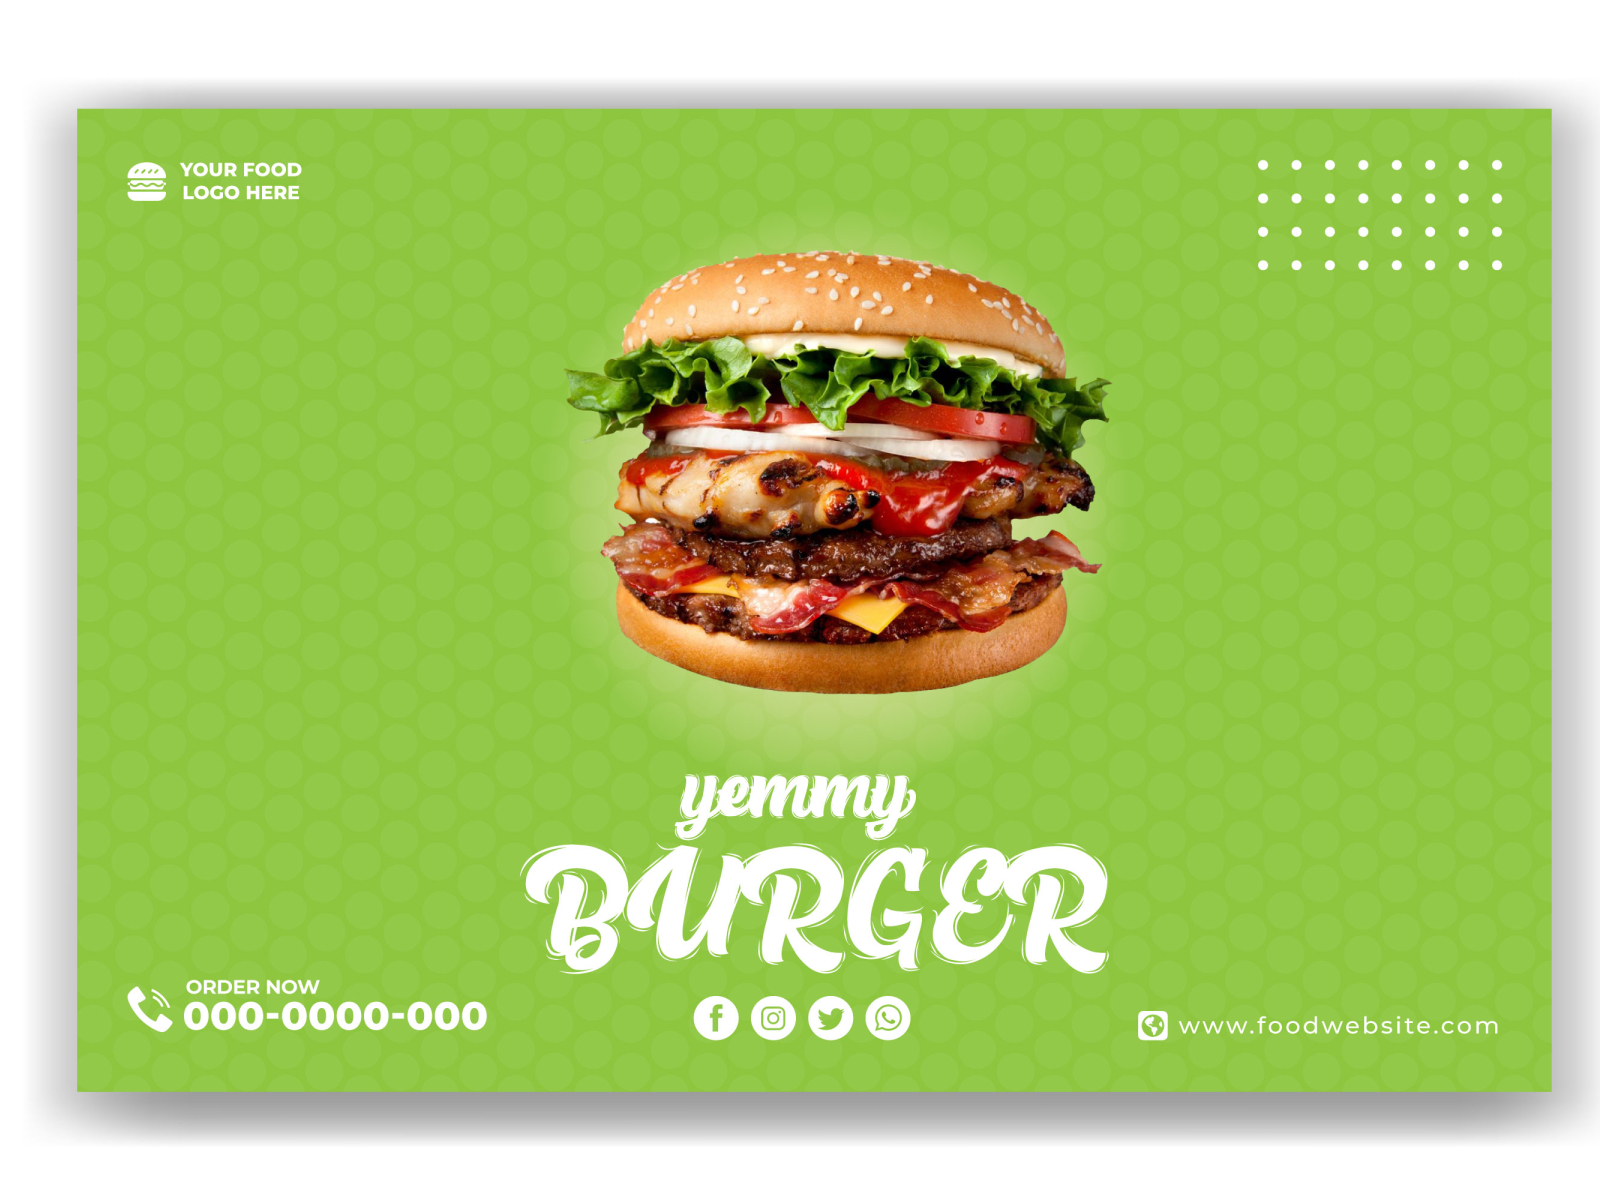 Food Web Banner template by Mrinal Hossain on Dribbble